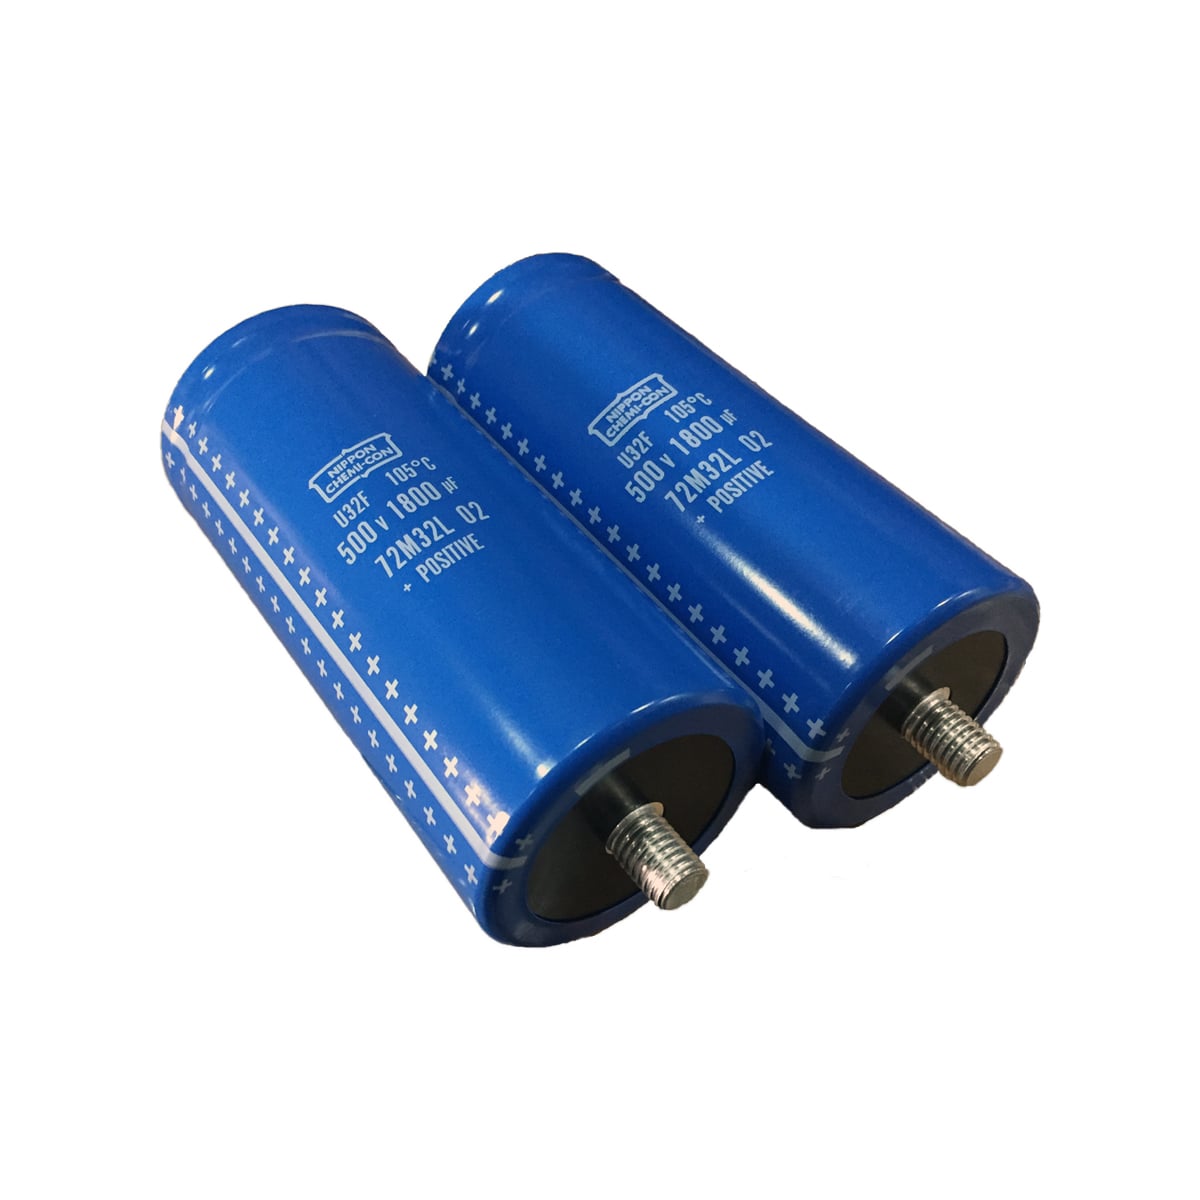 CAPACITOR ASSY . Part: 209960